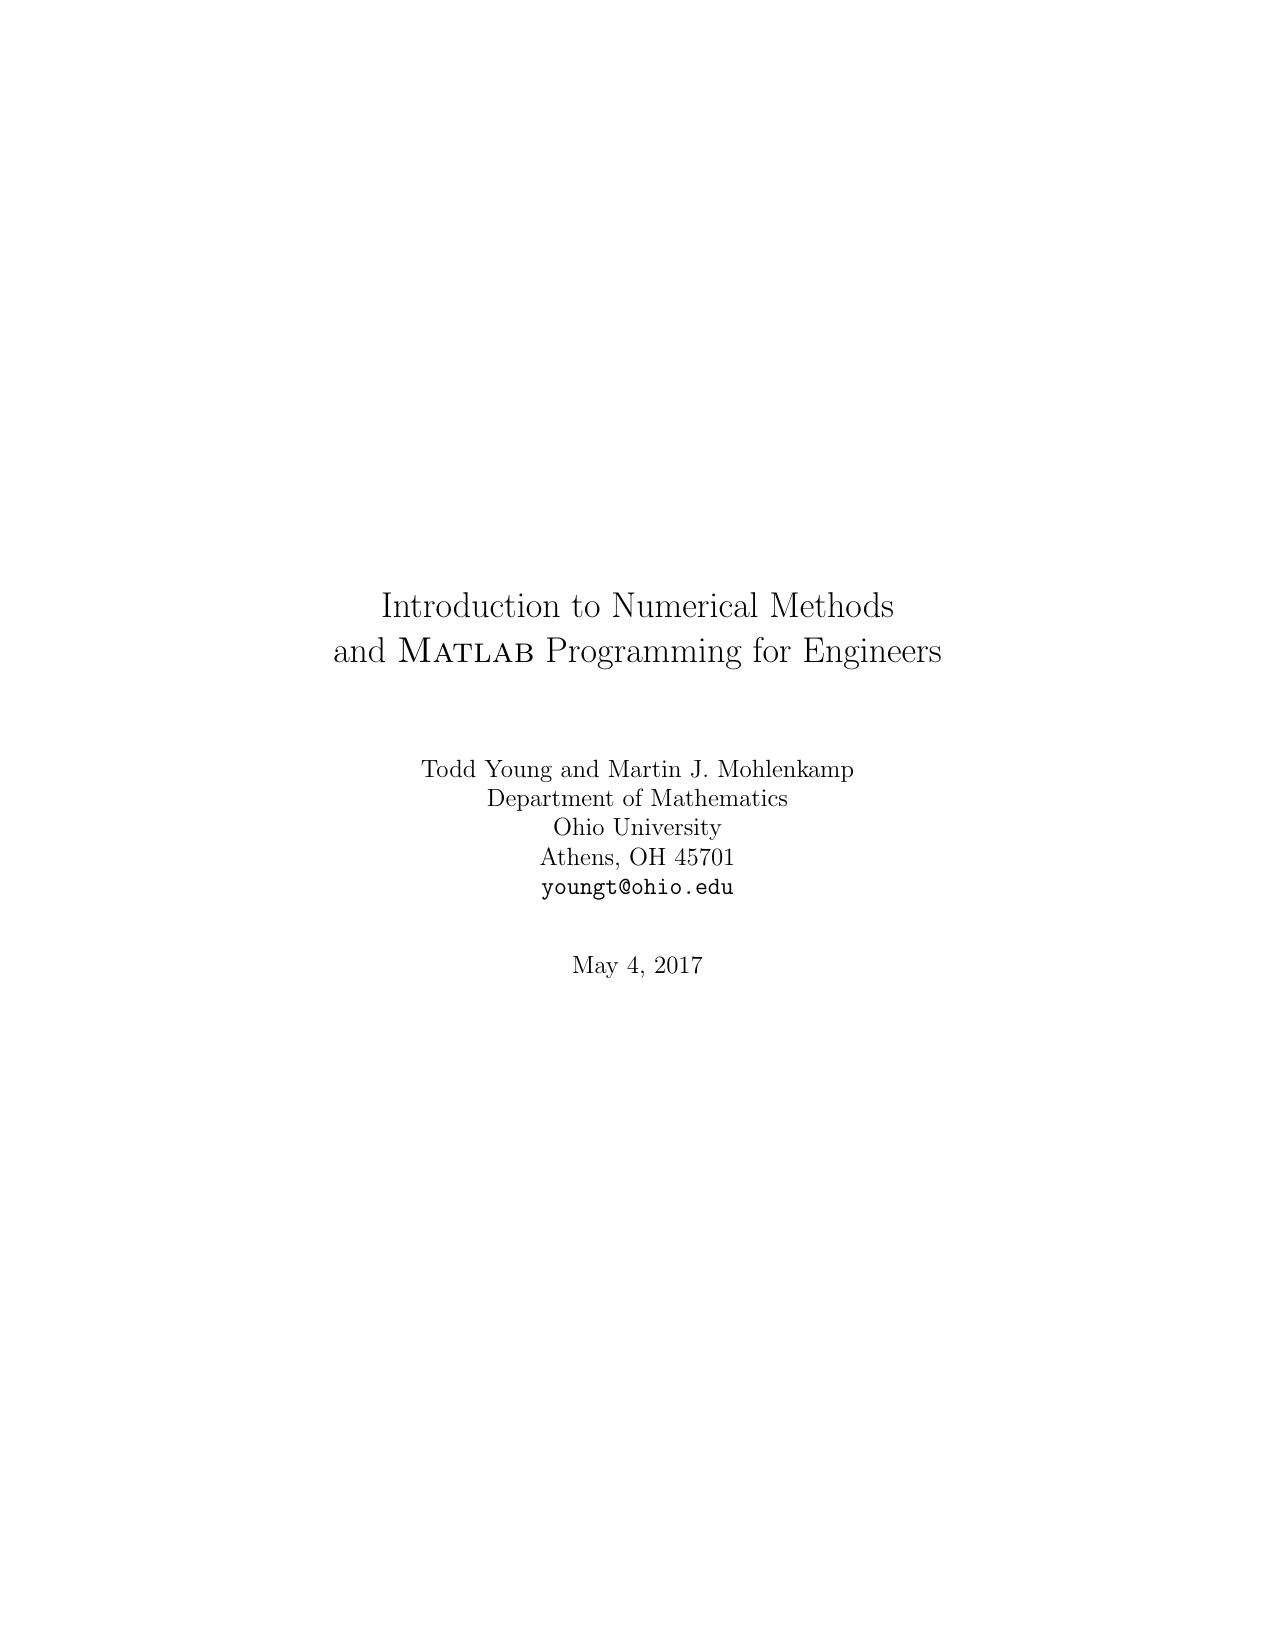 Introduction to Numerical Methods 2017.pdf